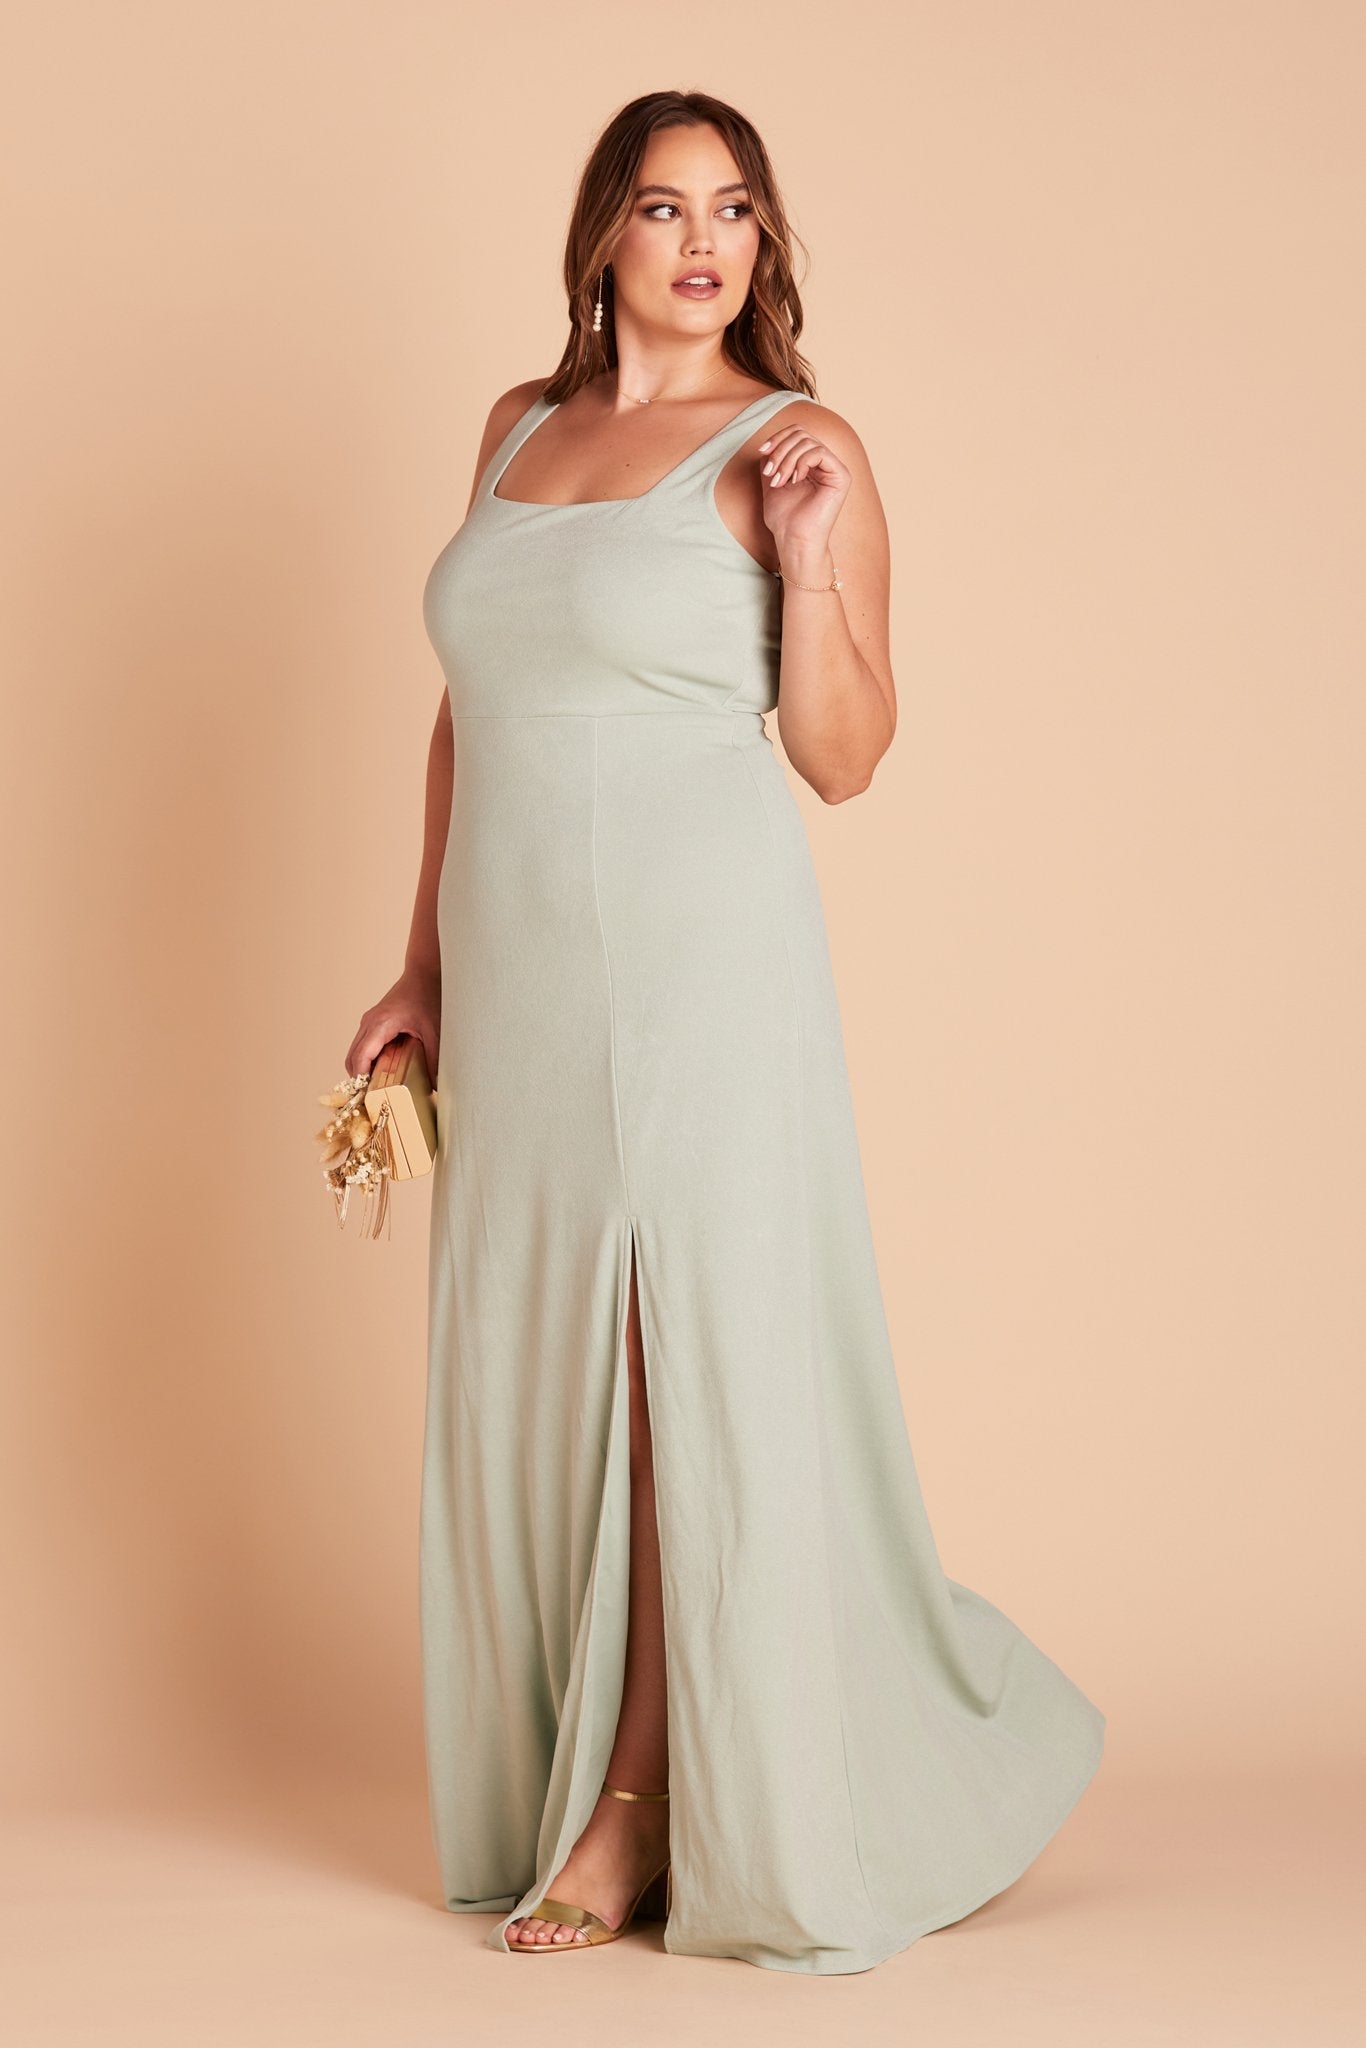 Side view of the Alex Convertible Plus Size Bridesmaid Dress in sage green crepe without shoulder ties reveals a fitted bust and waistline with a delicate flowing floor-length skirt.